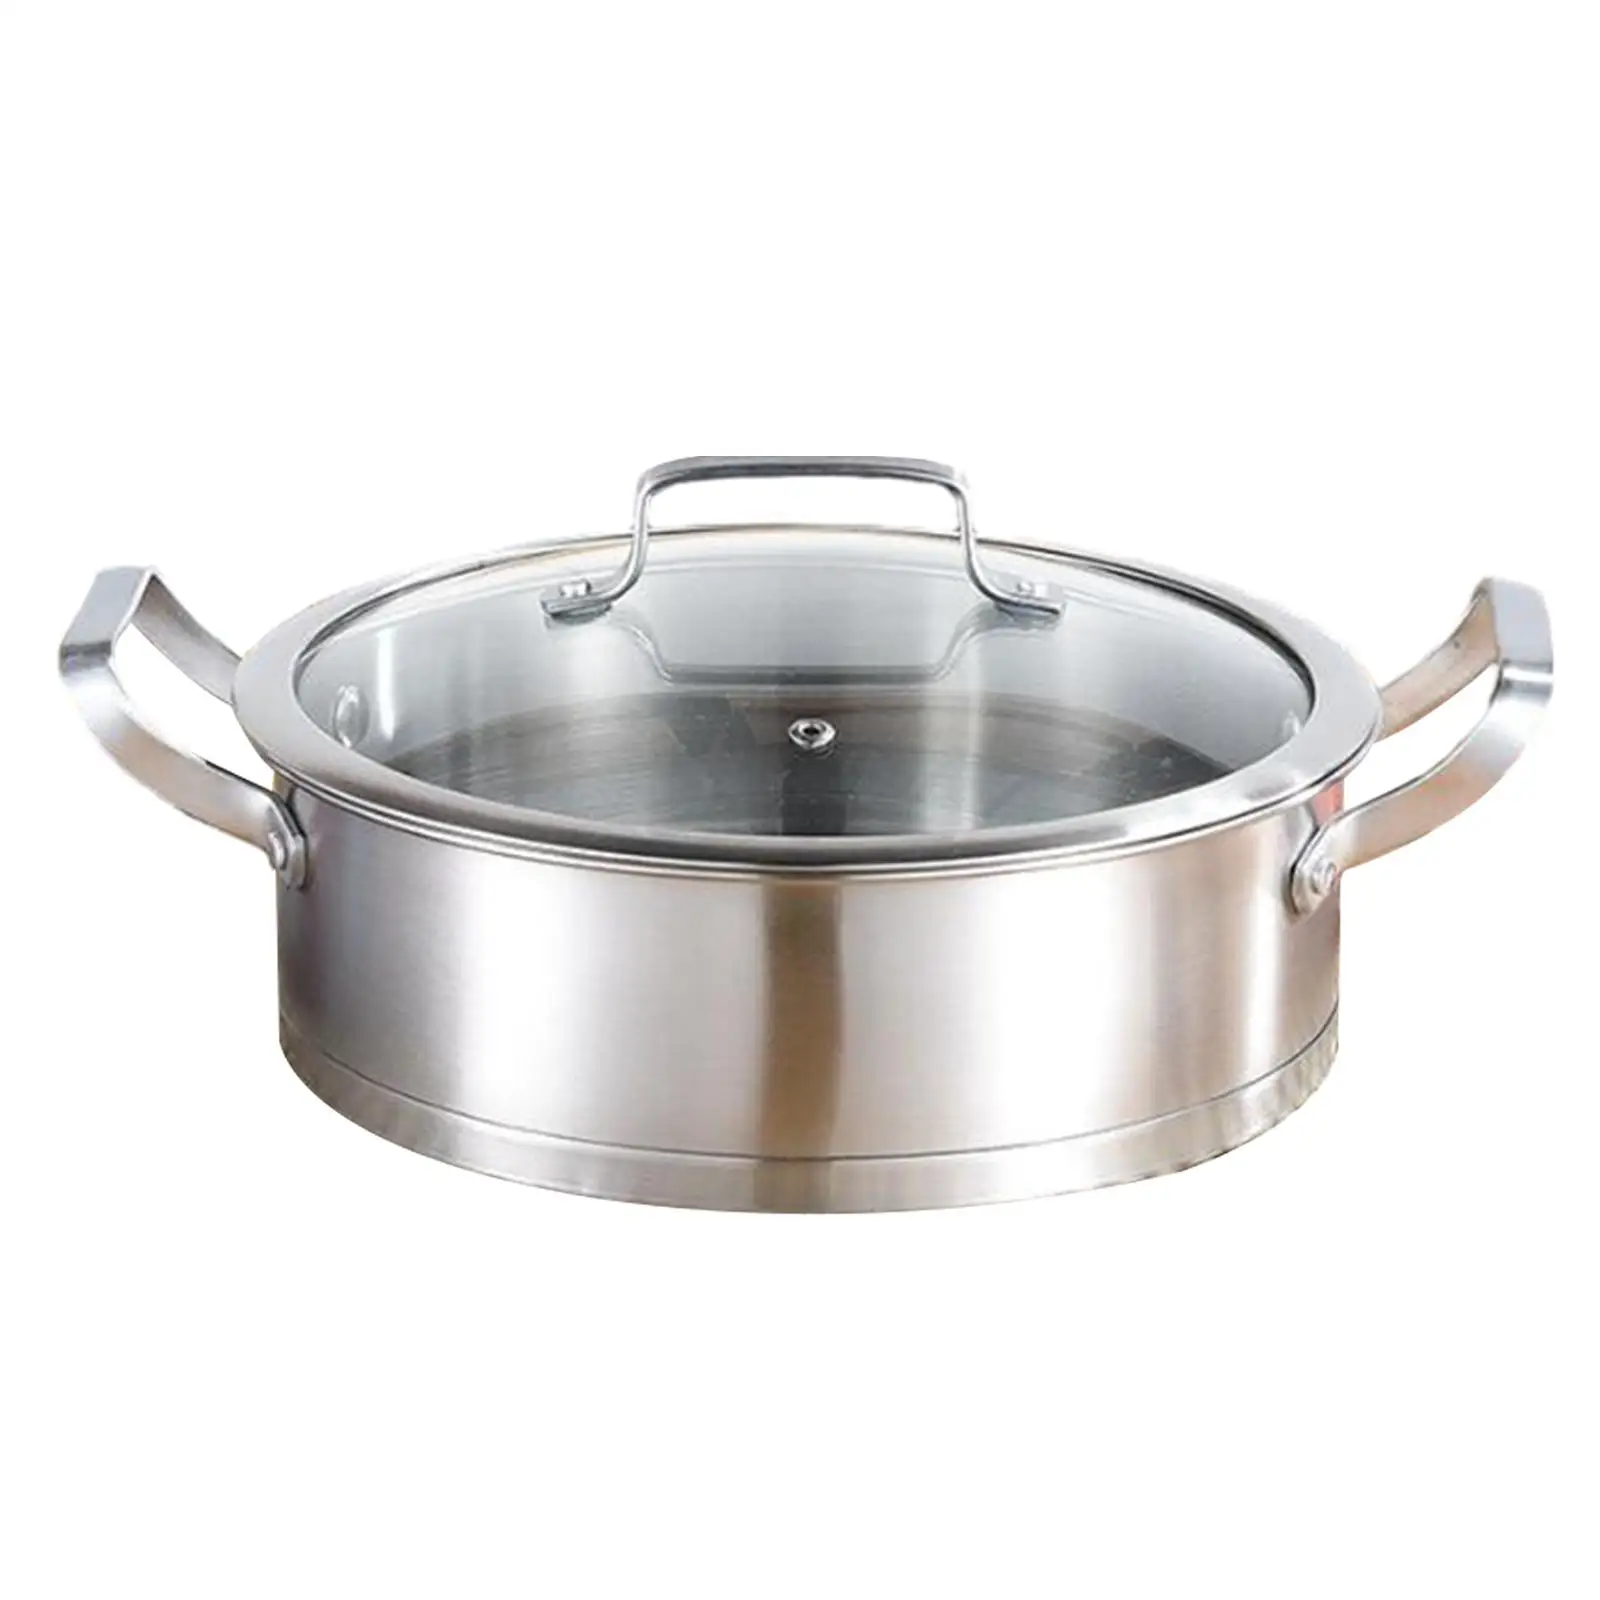 Kitchen Utensils Portable Frying Pan Stockpot with Lid Soup Pot Cooking Pot for Cafe Restaurant Kitchen Countertop Home Bar